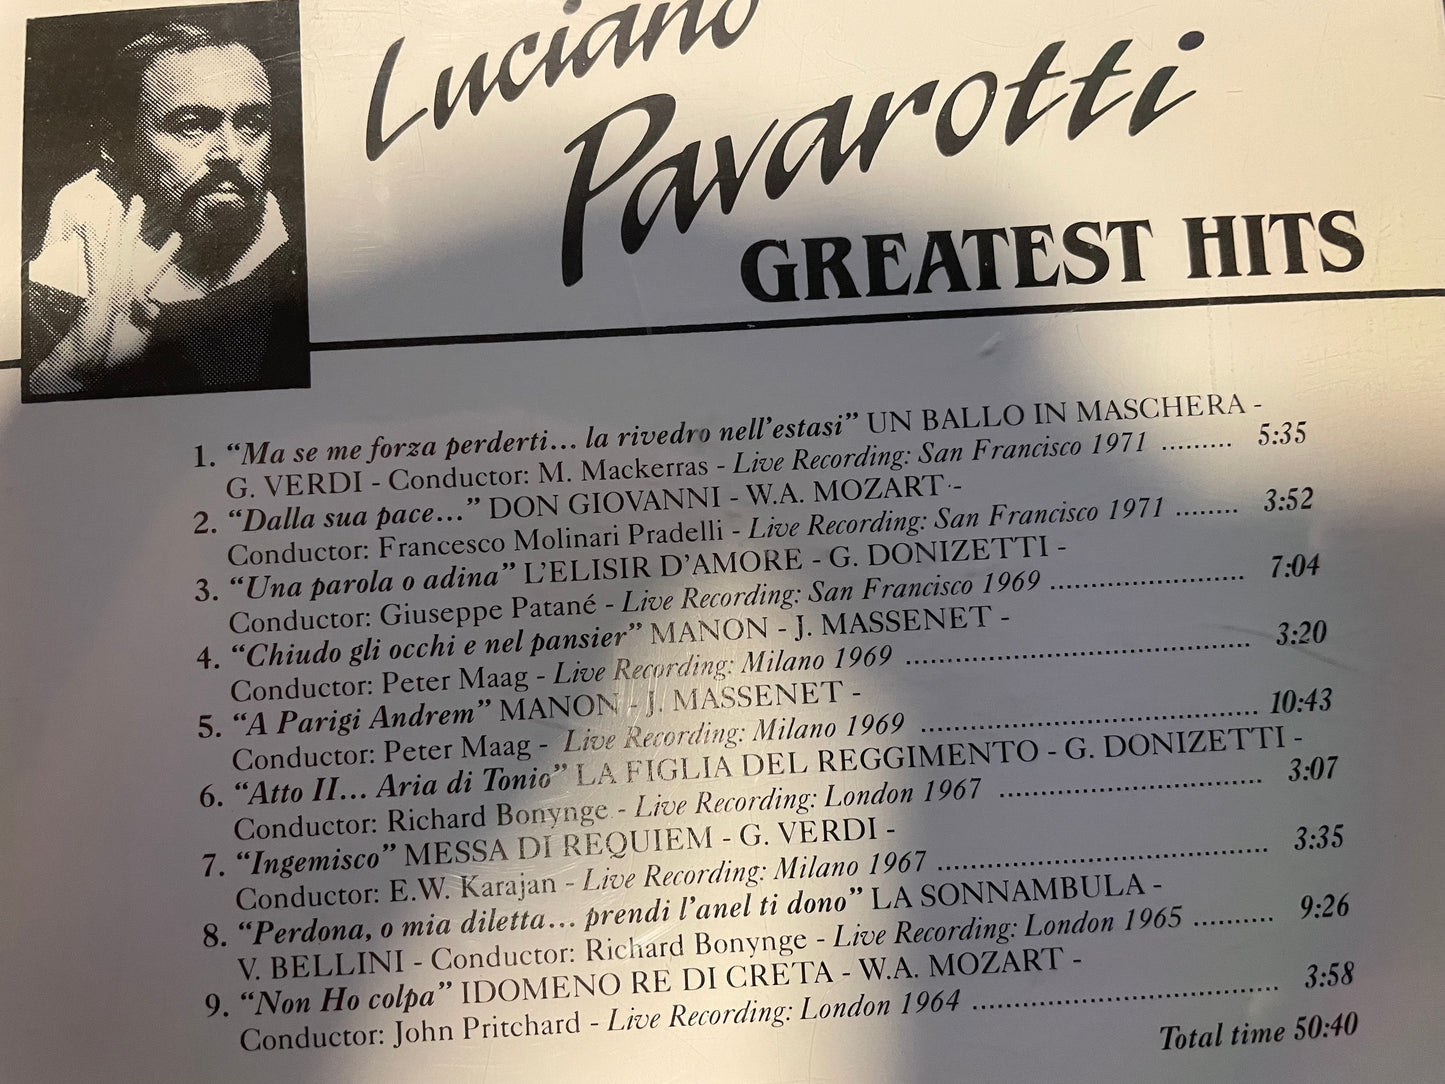 LUCIANO PAVAROTTI "GREATEST HITS VOL. 2"-$ 14,99 +$5.00 SHIPPING